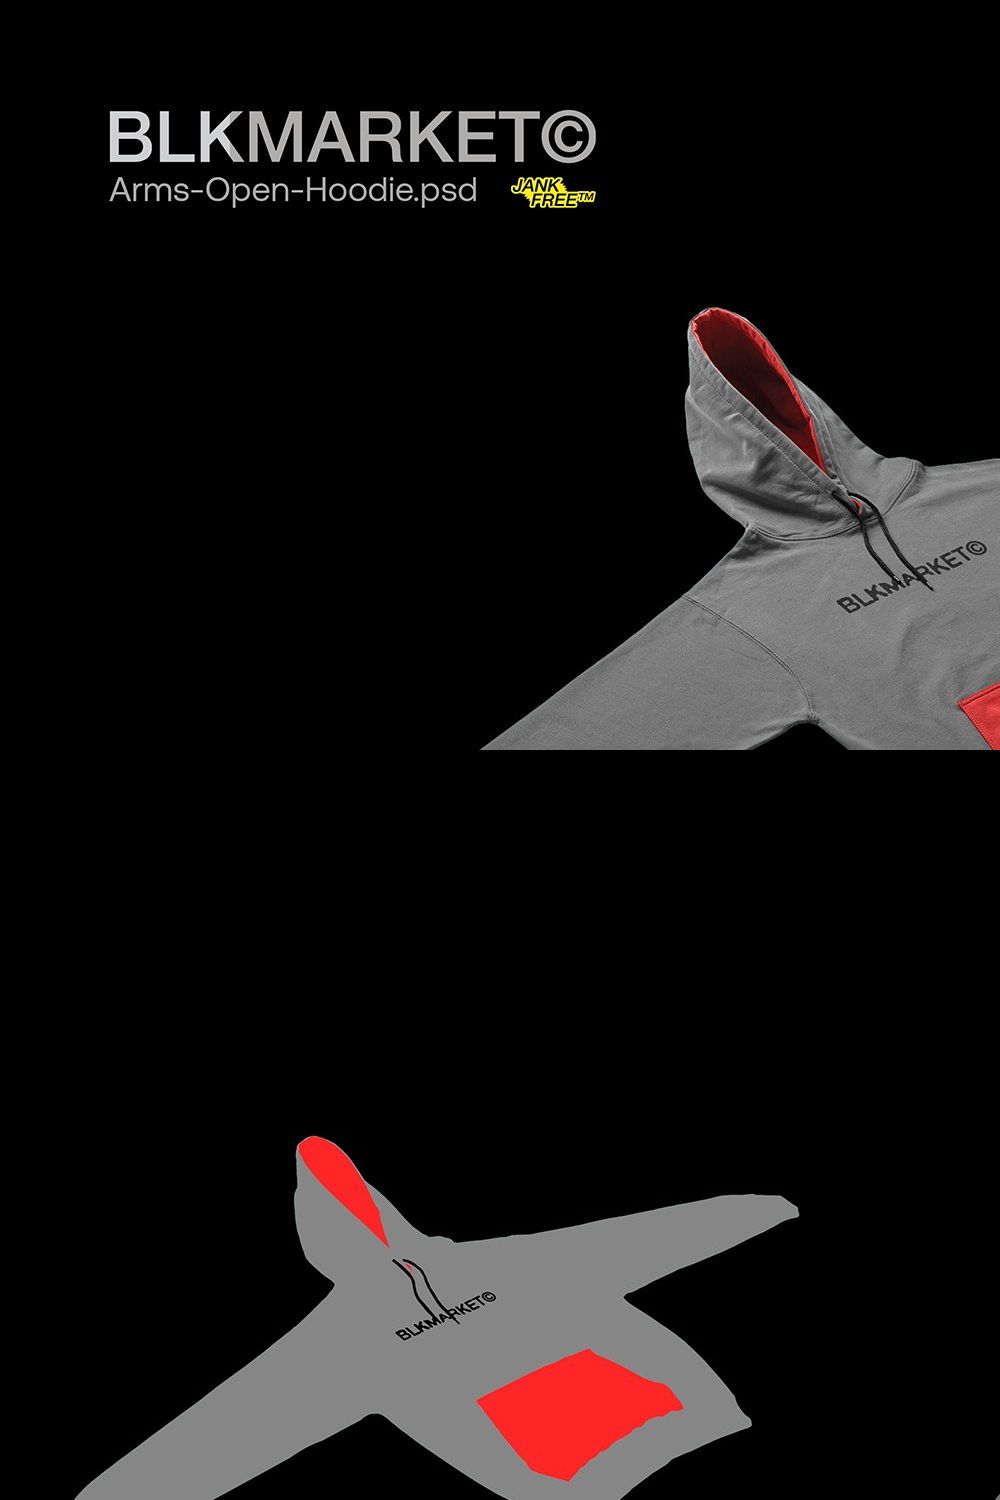 Angled-Hoodie.psd - Streetwear pinterest preview image.